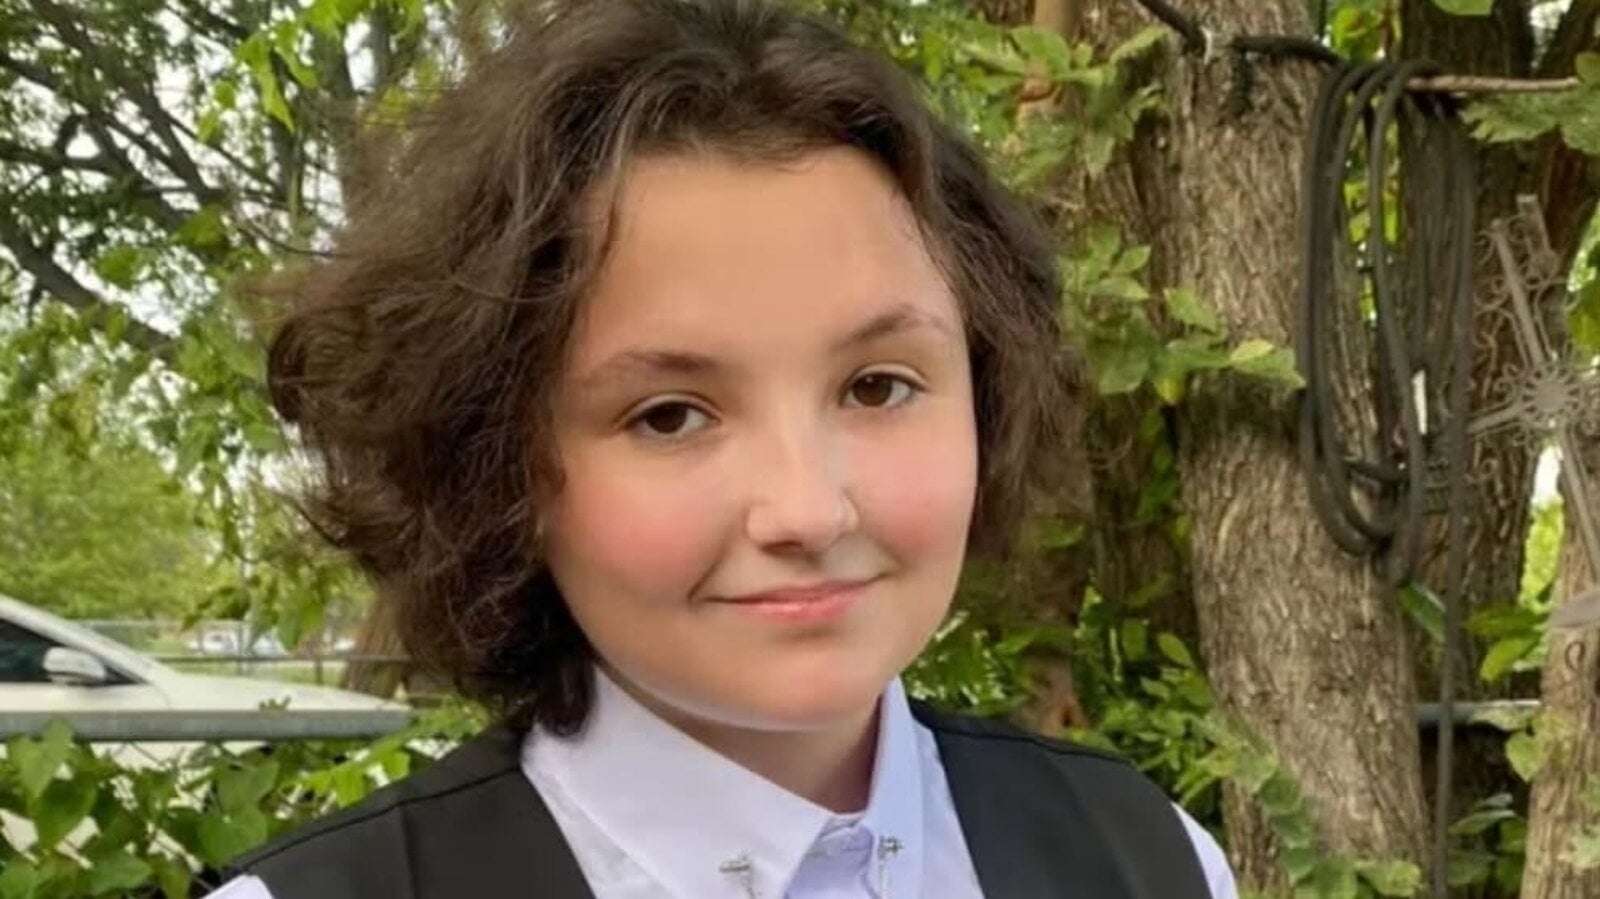 image for LGBTQ teen Nex Benedict died by suicide, medical examiner says